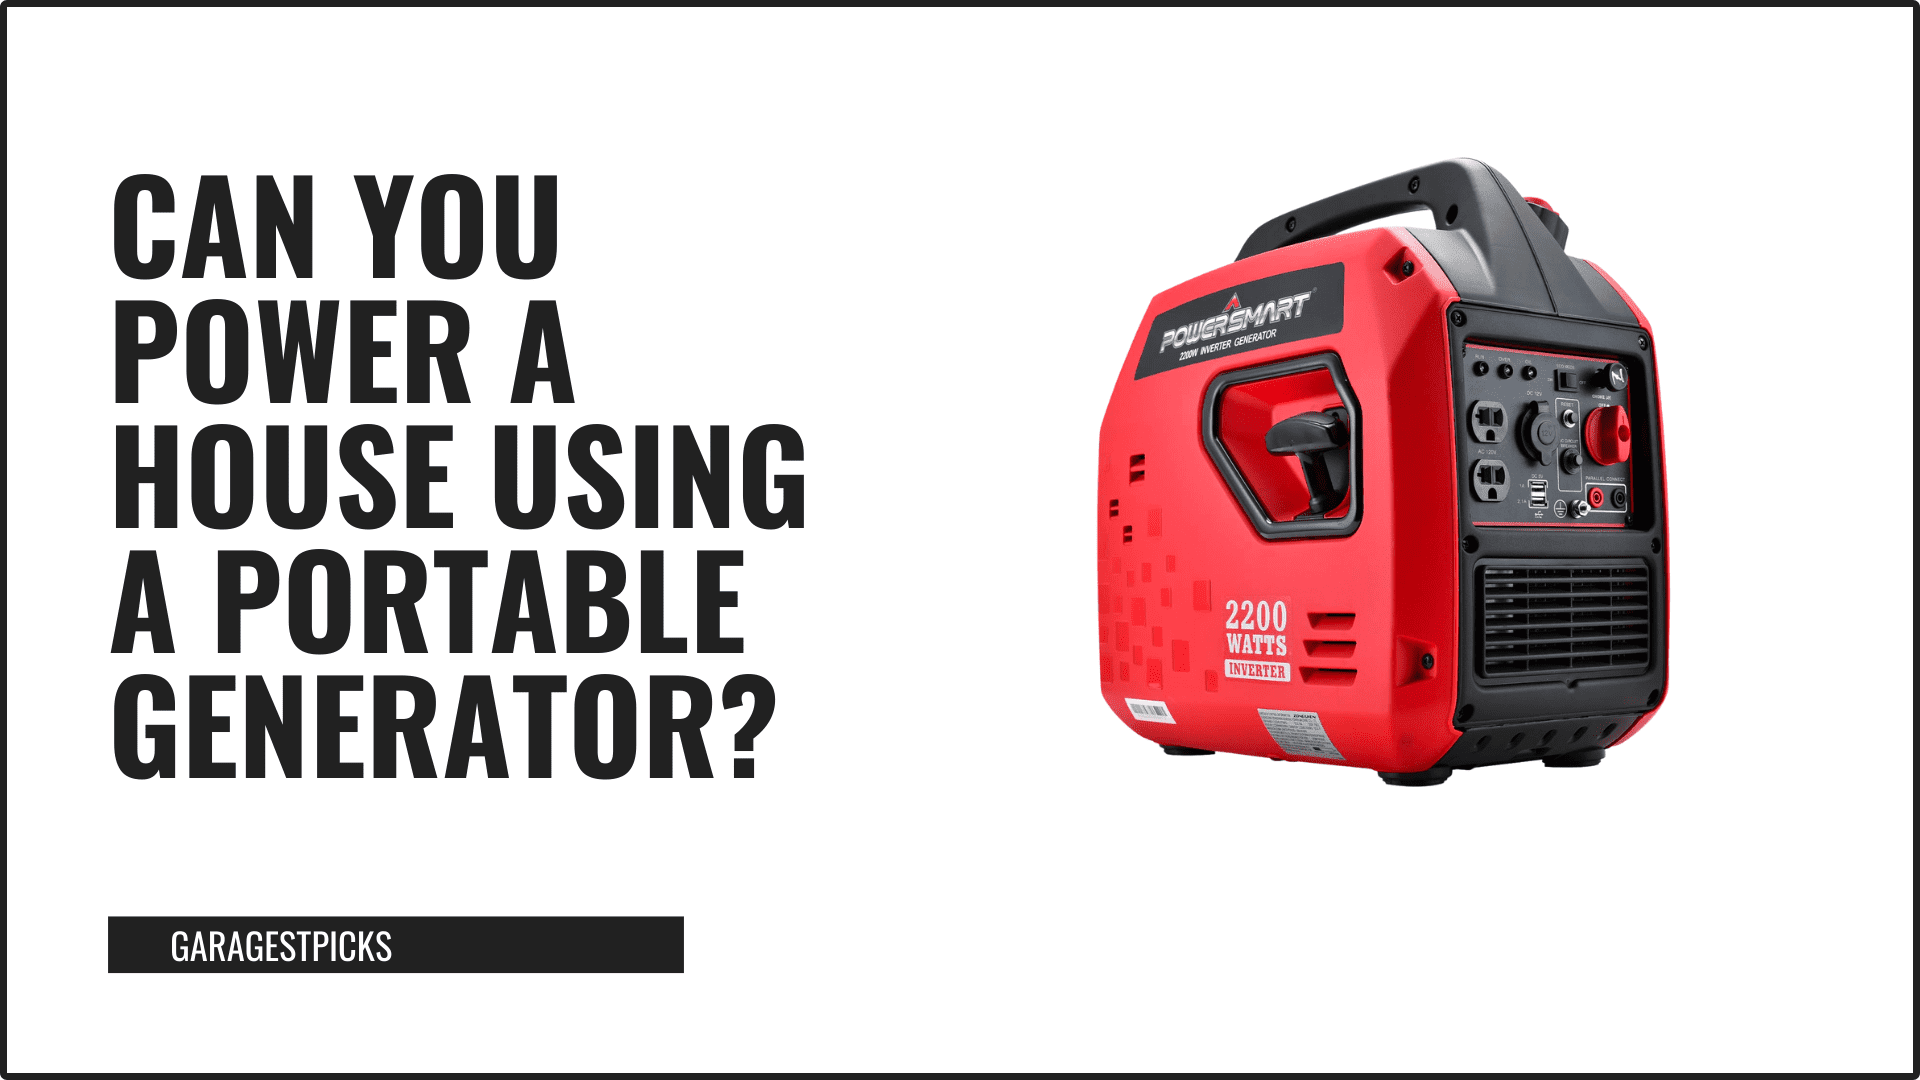 Can you power a house using portable generator in black text on white background with image of portable generator